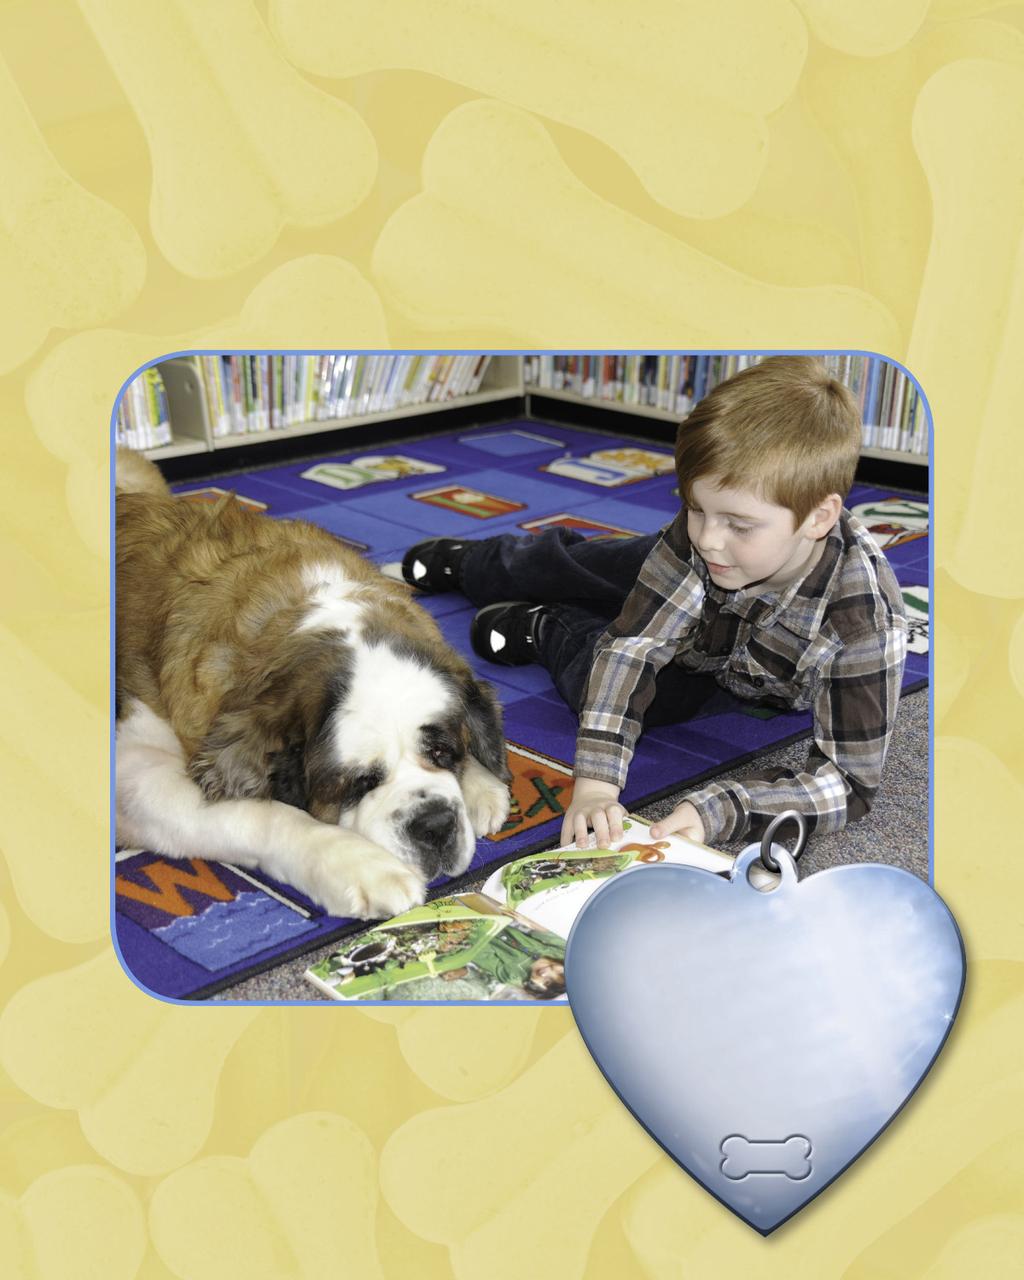 Katie is a therapy dog. She works at the library encouraging children to read books. She also helps those who have trouble reading.